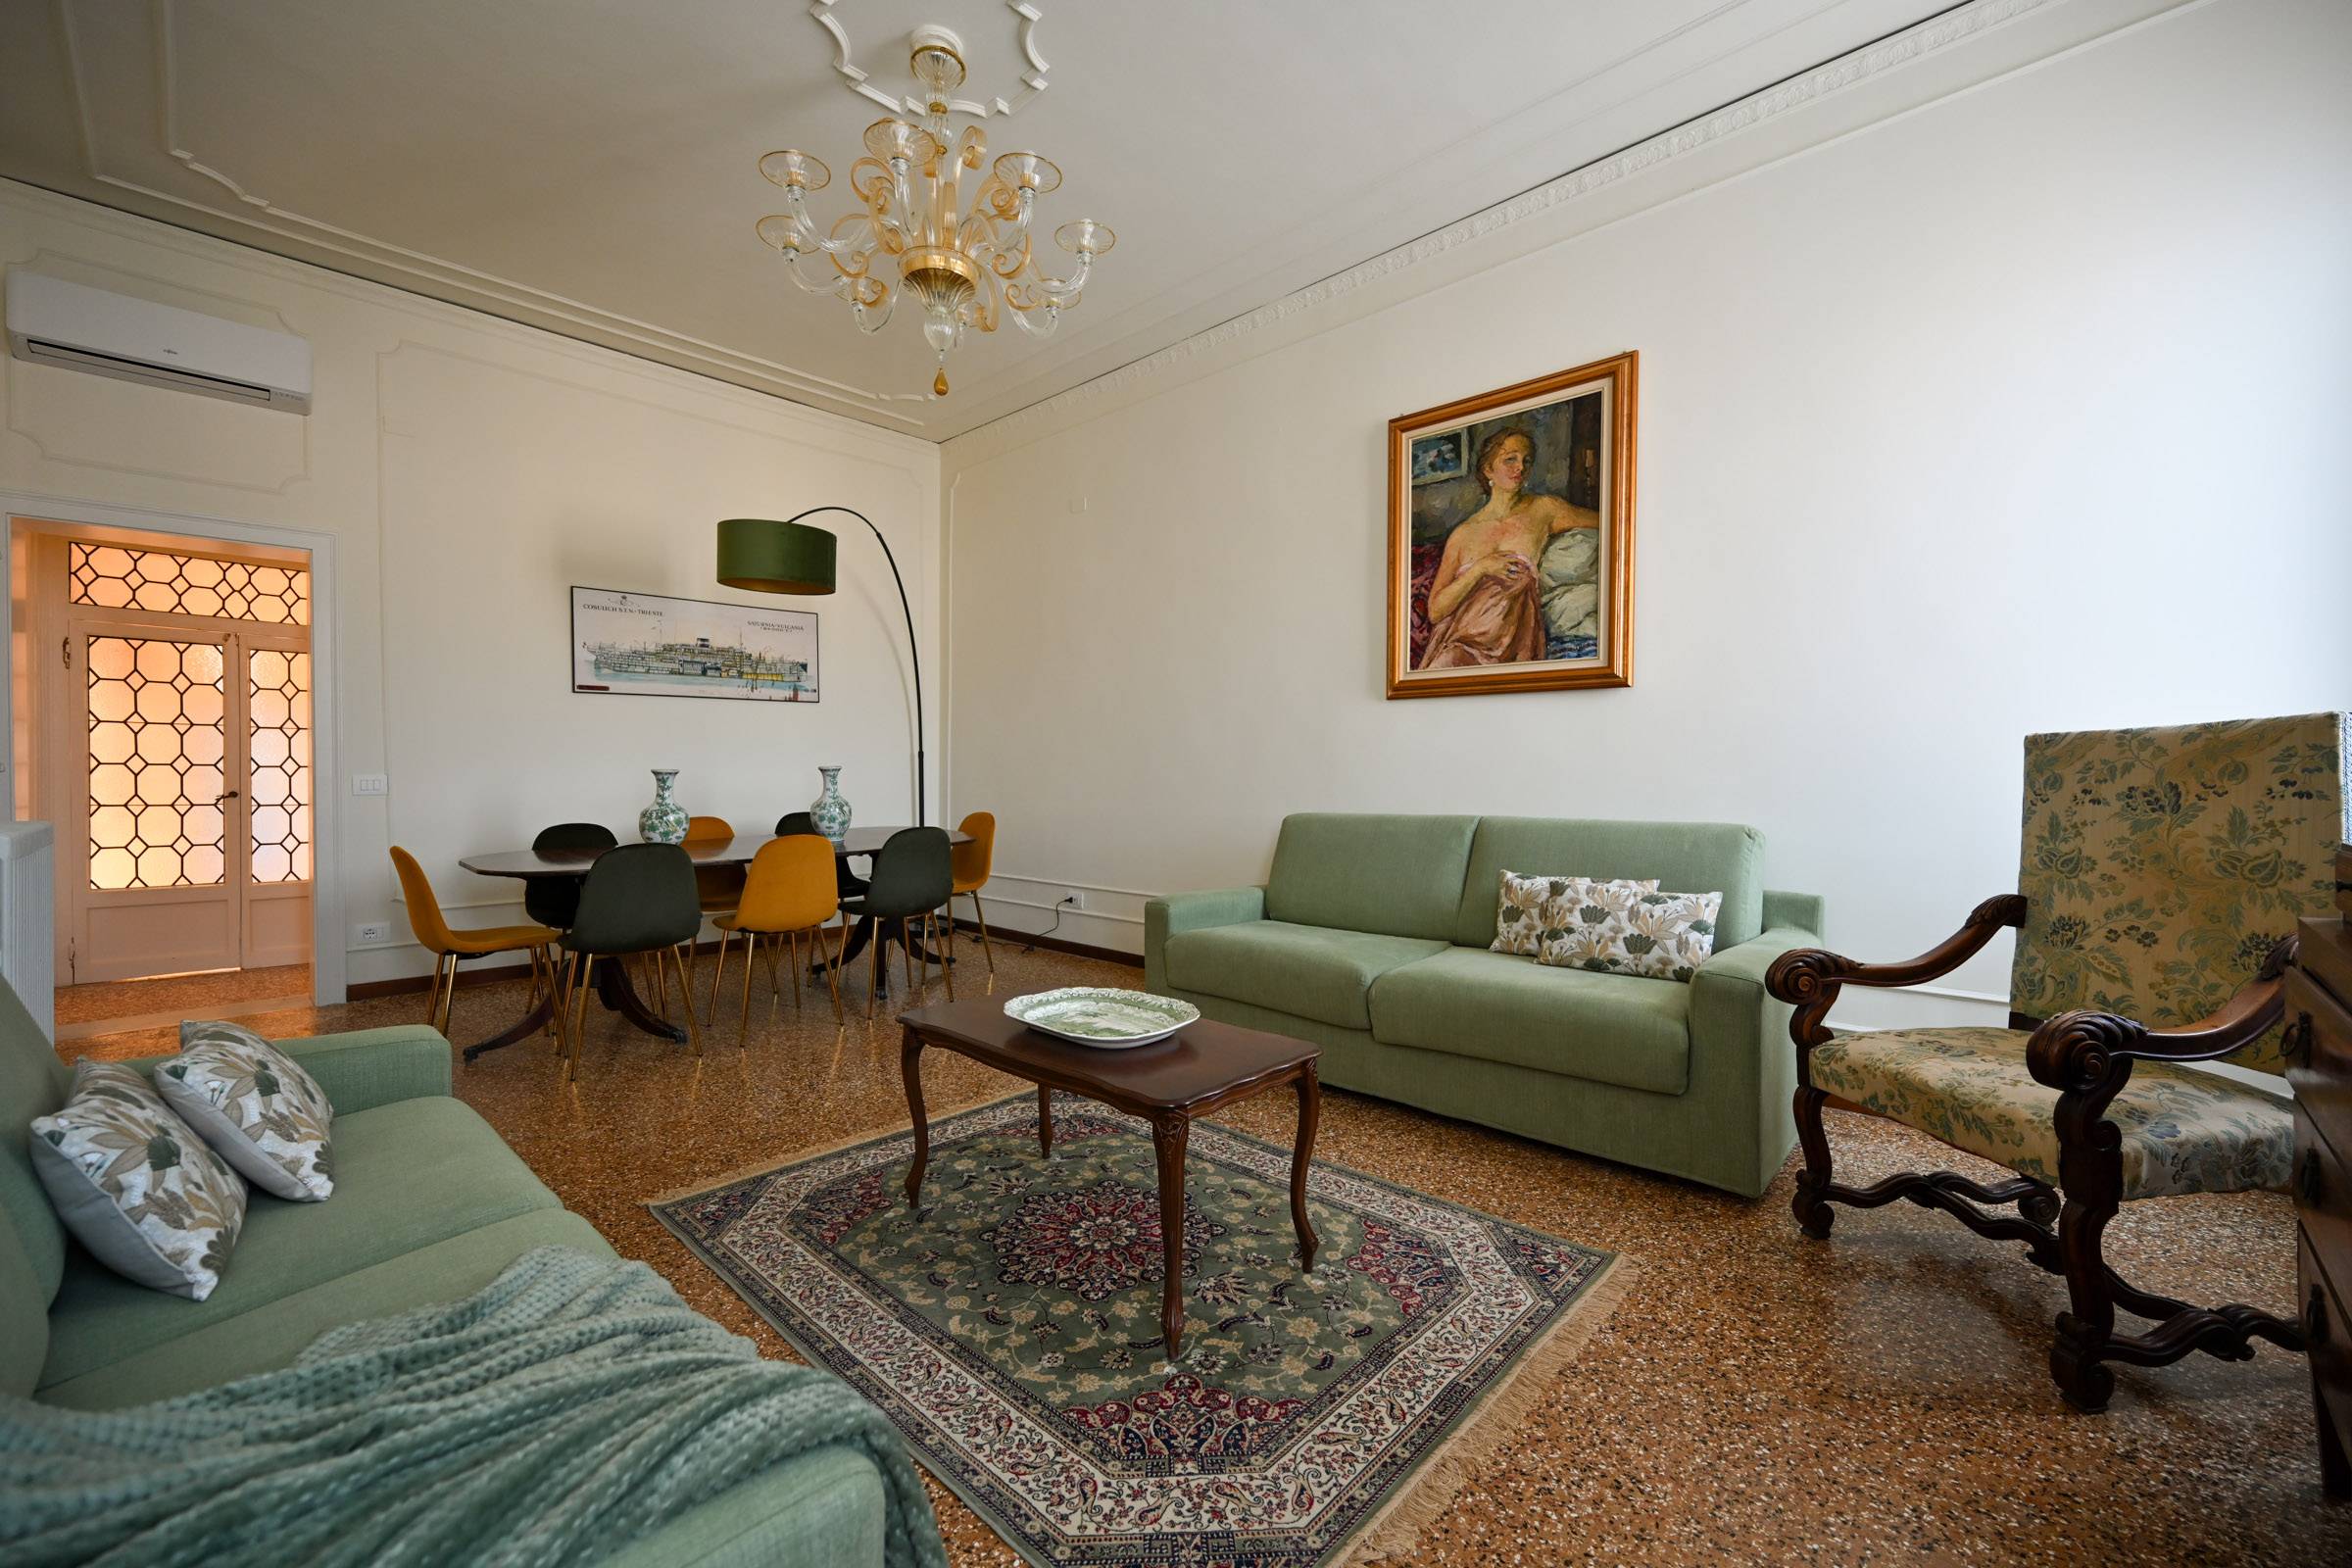 there is a double sofa-bed and a large wooden table with plenty of comfortable sitting space